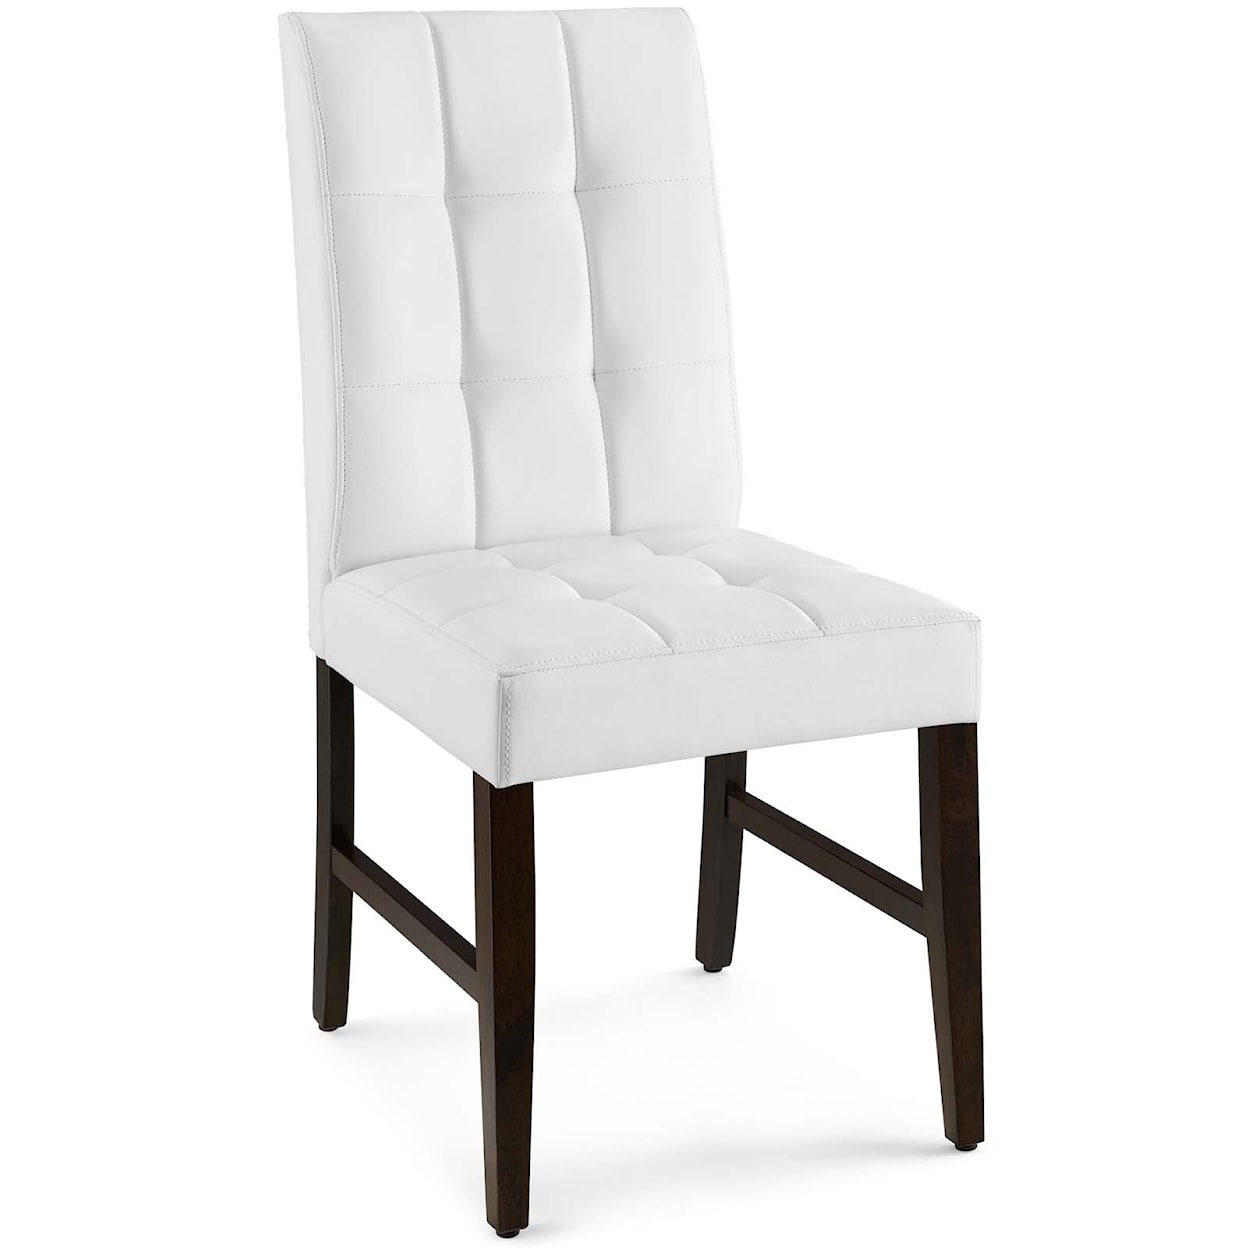 Modway Promulgate Dining Side Chair